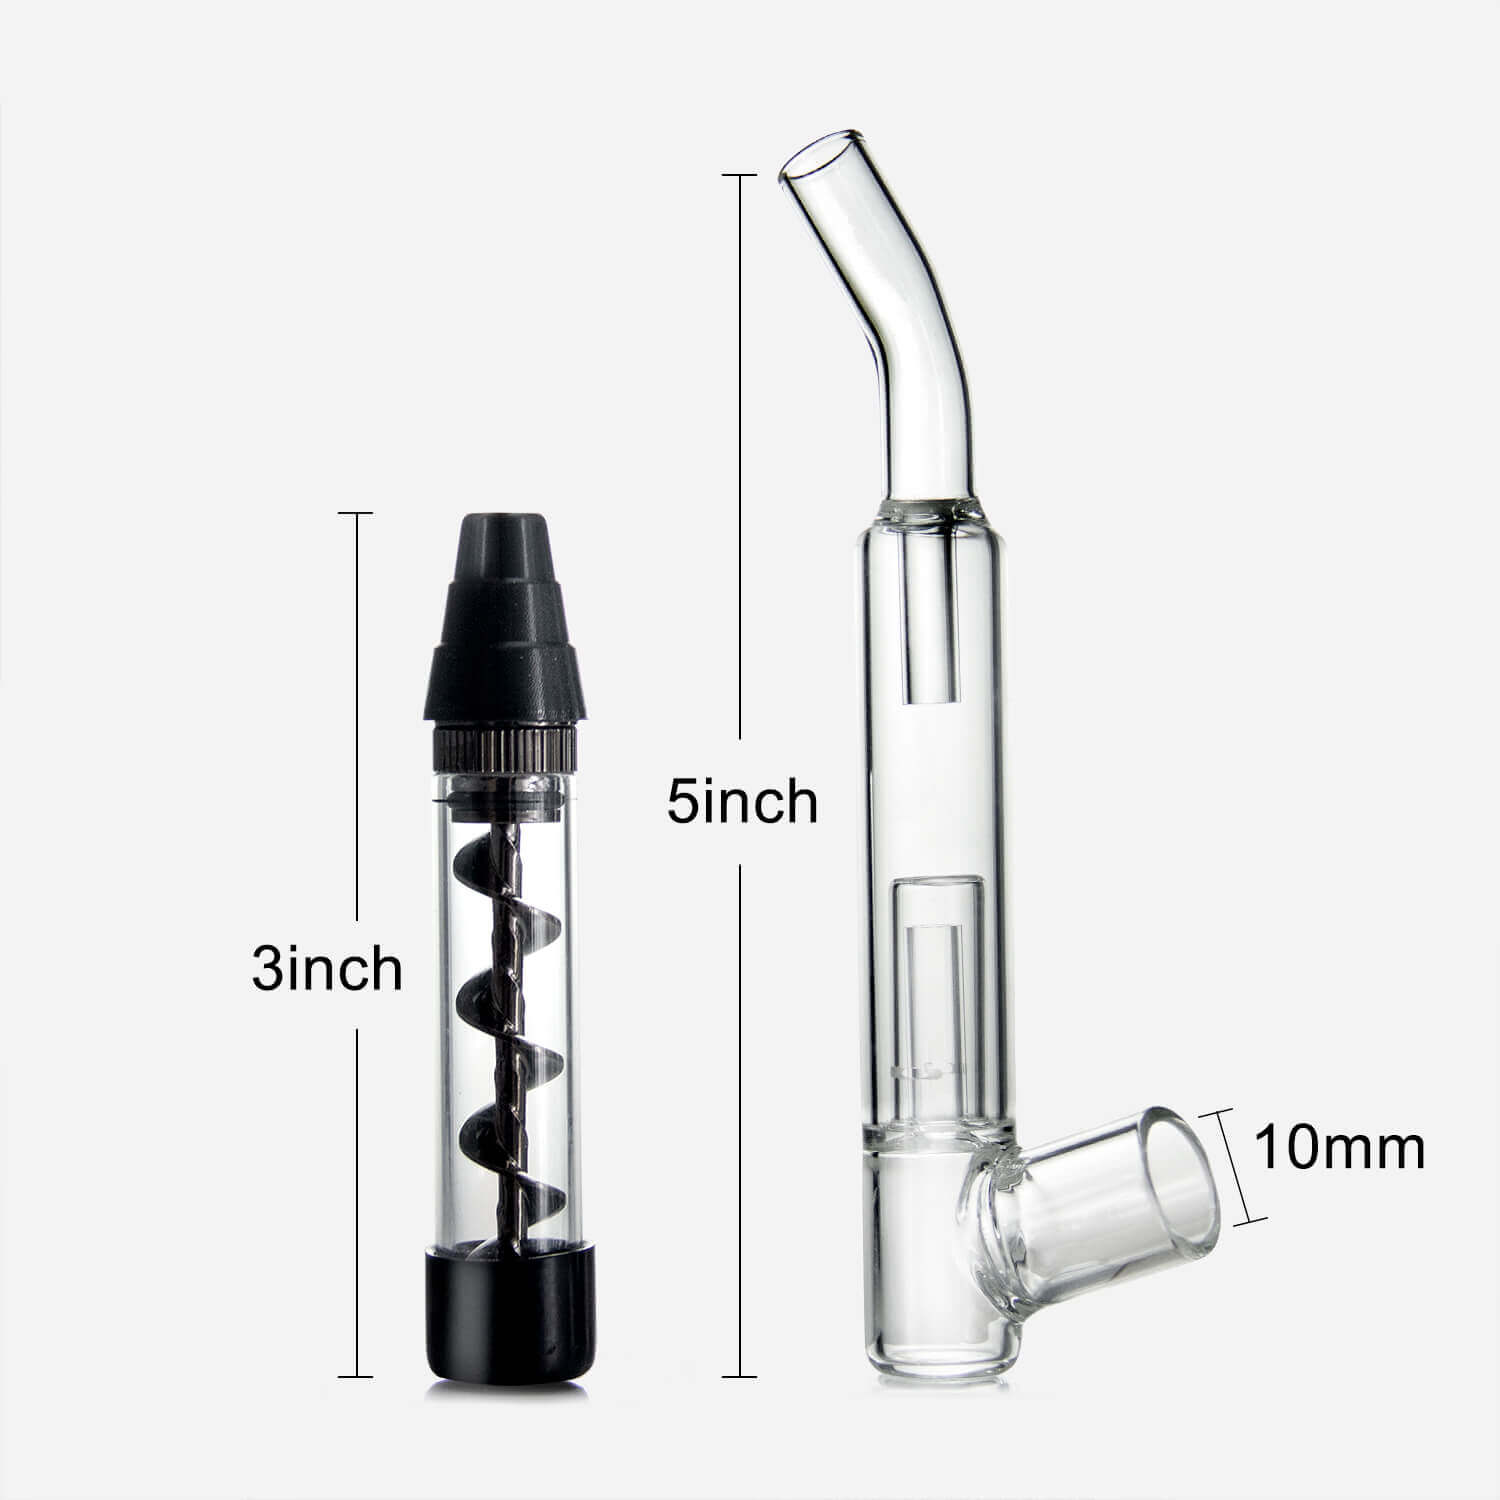 Skunk Labs Compact Twisty Glass Blunt Pipe Bubbler Set W/ Accessories for  sale online